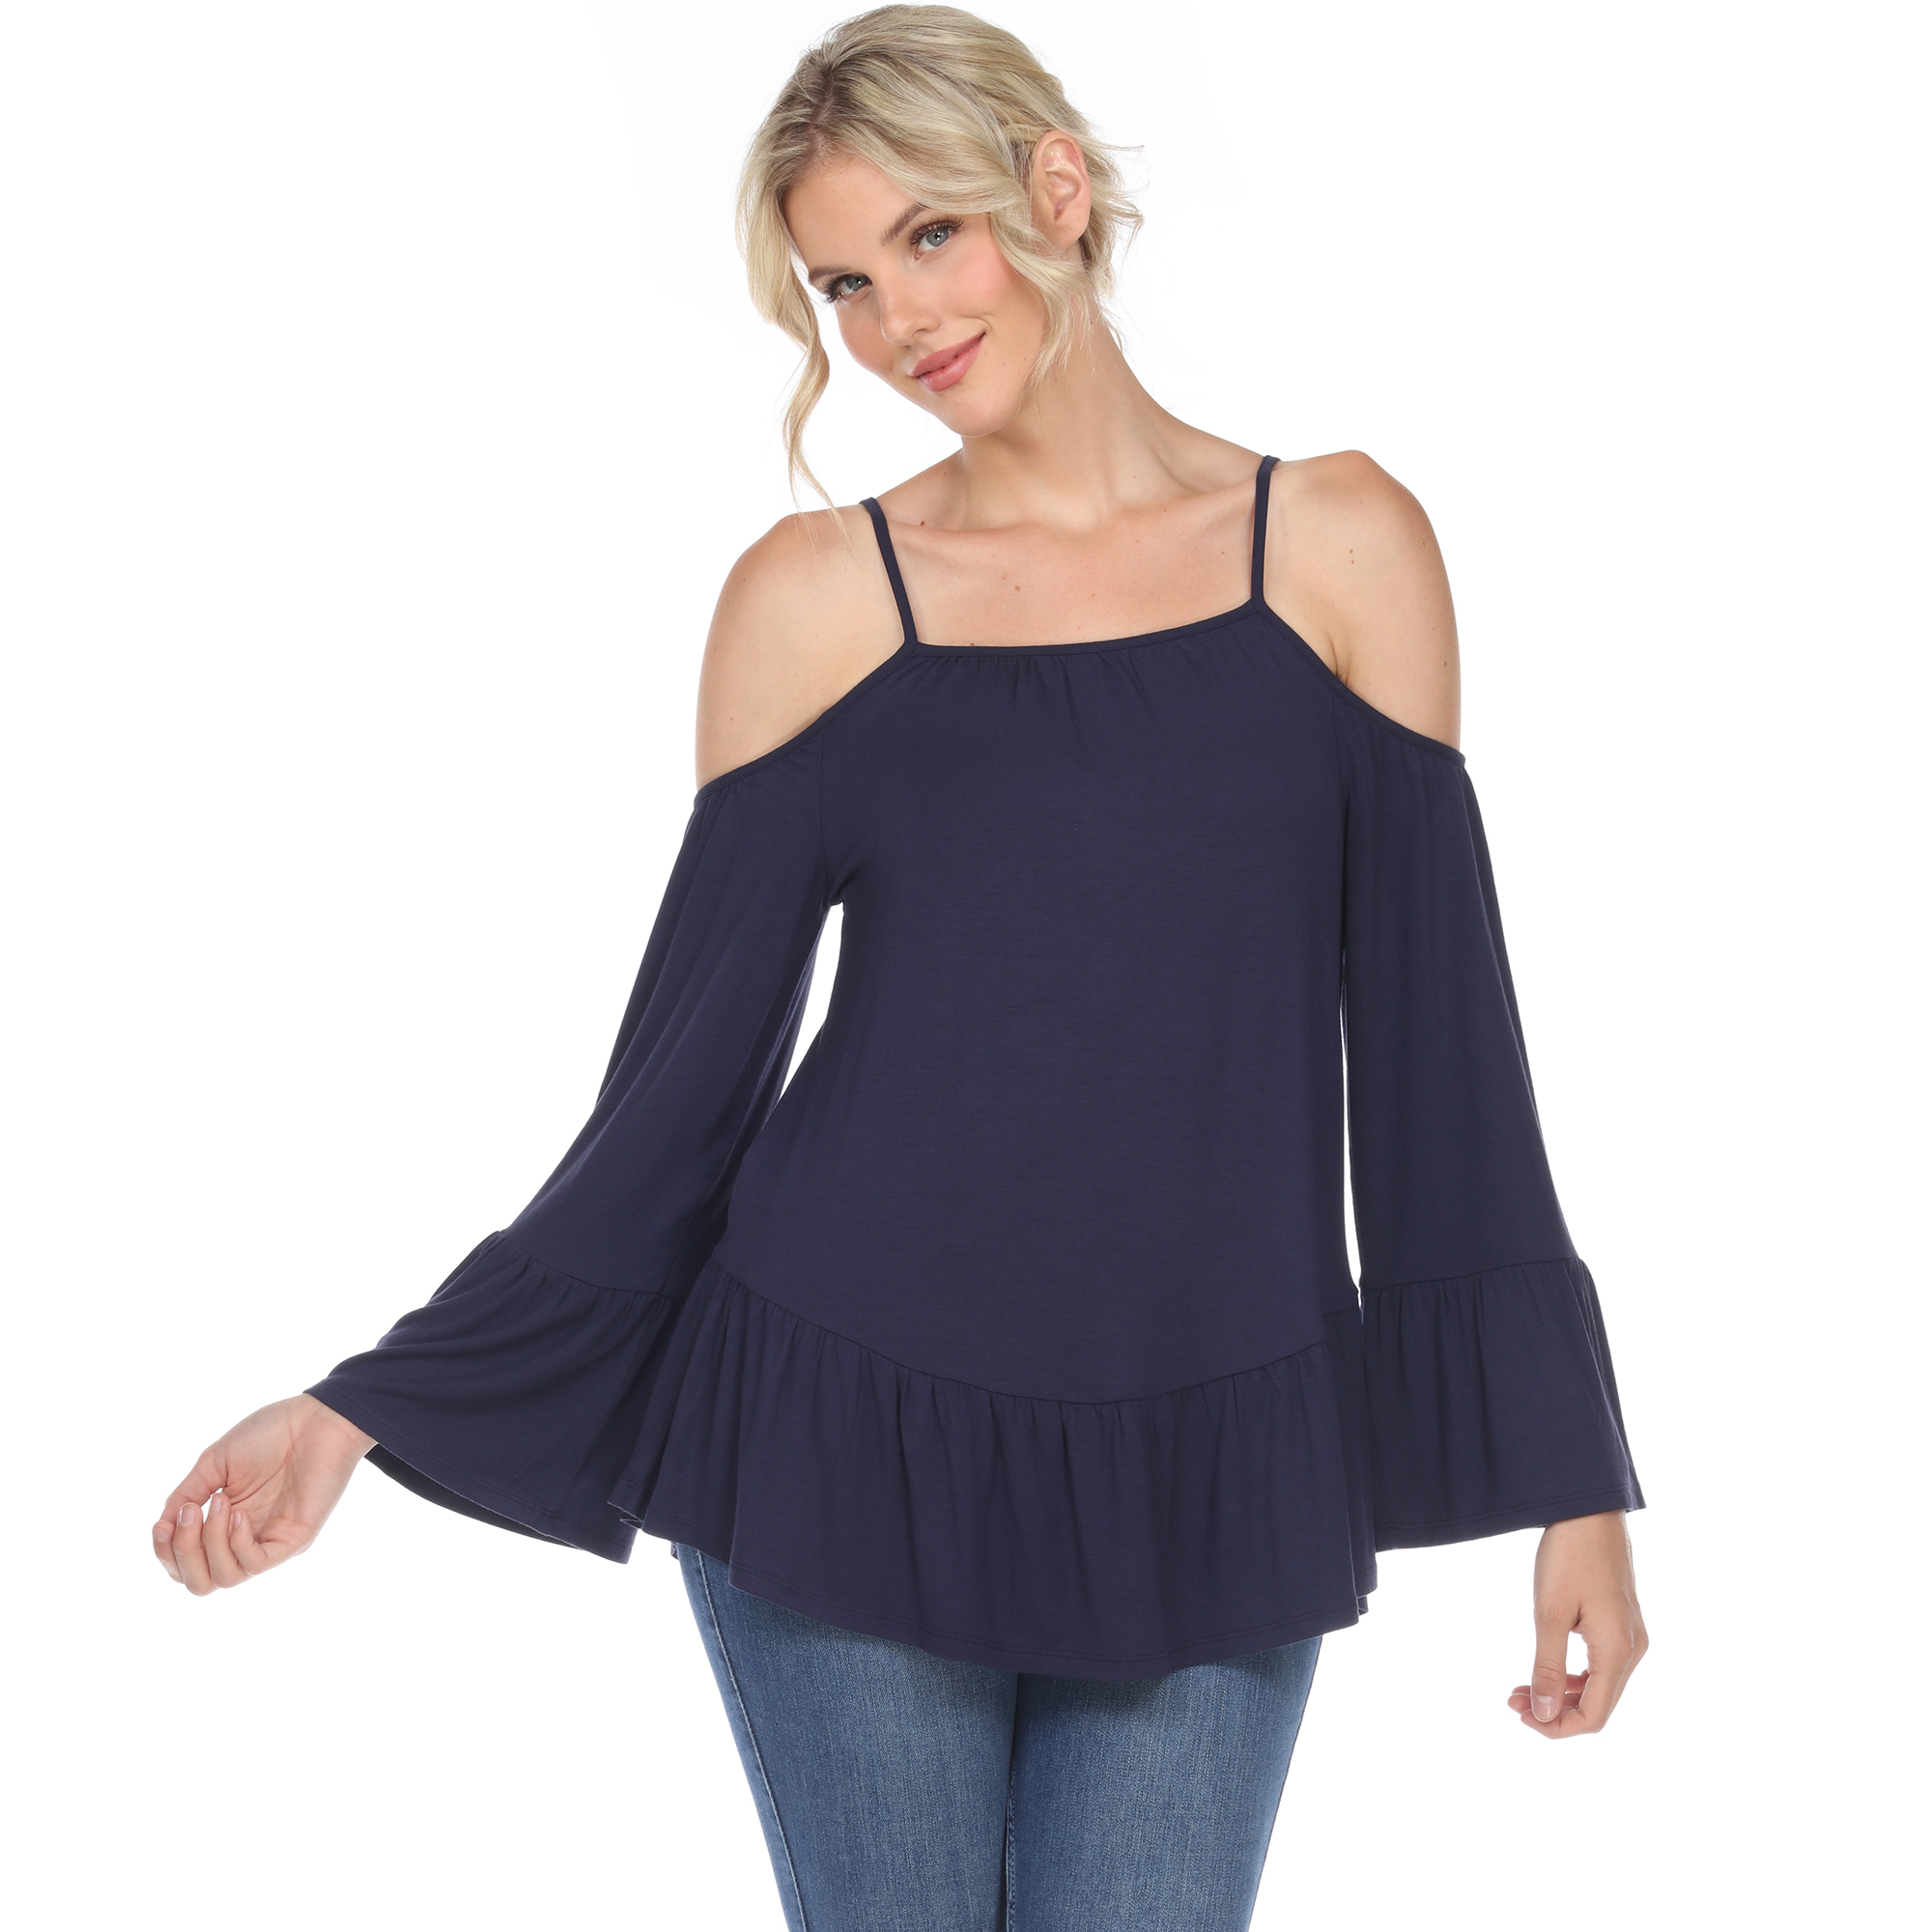 White Mark Women's Cold Shoulder Ruffle Sleeve Top - Navy, 3X